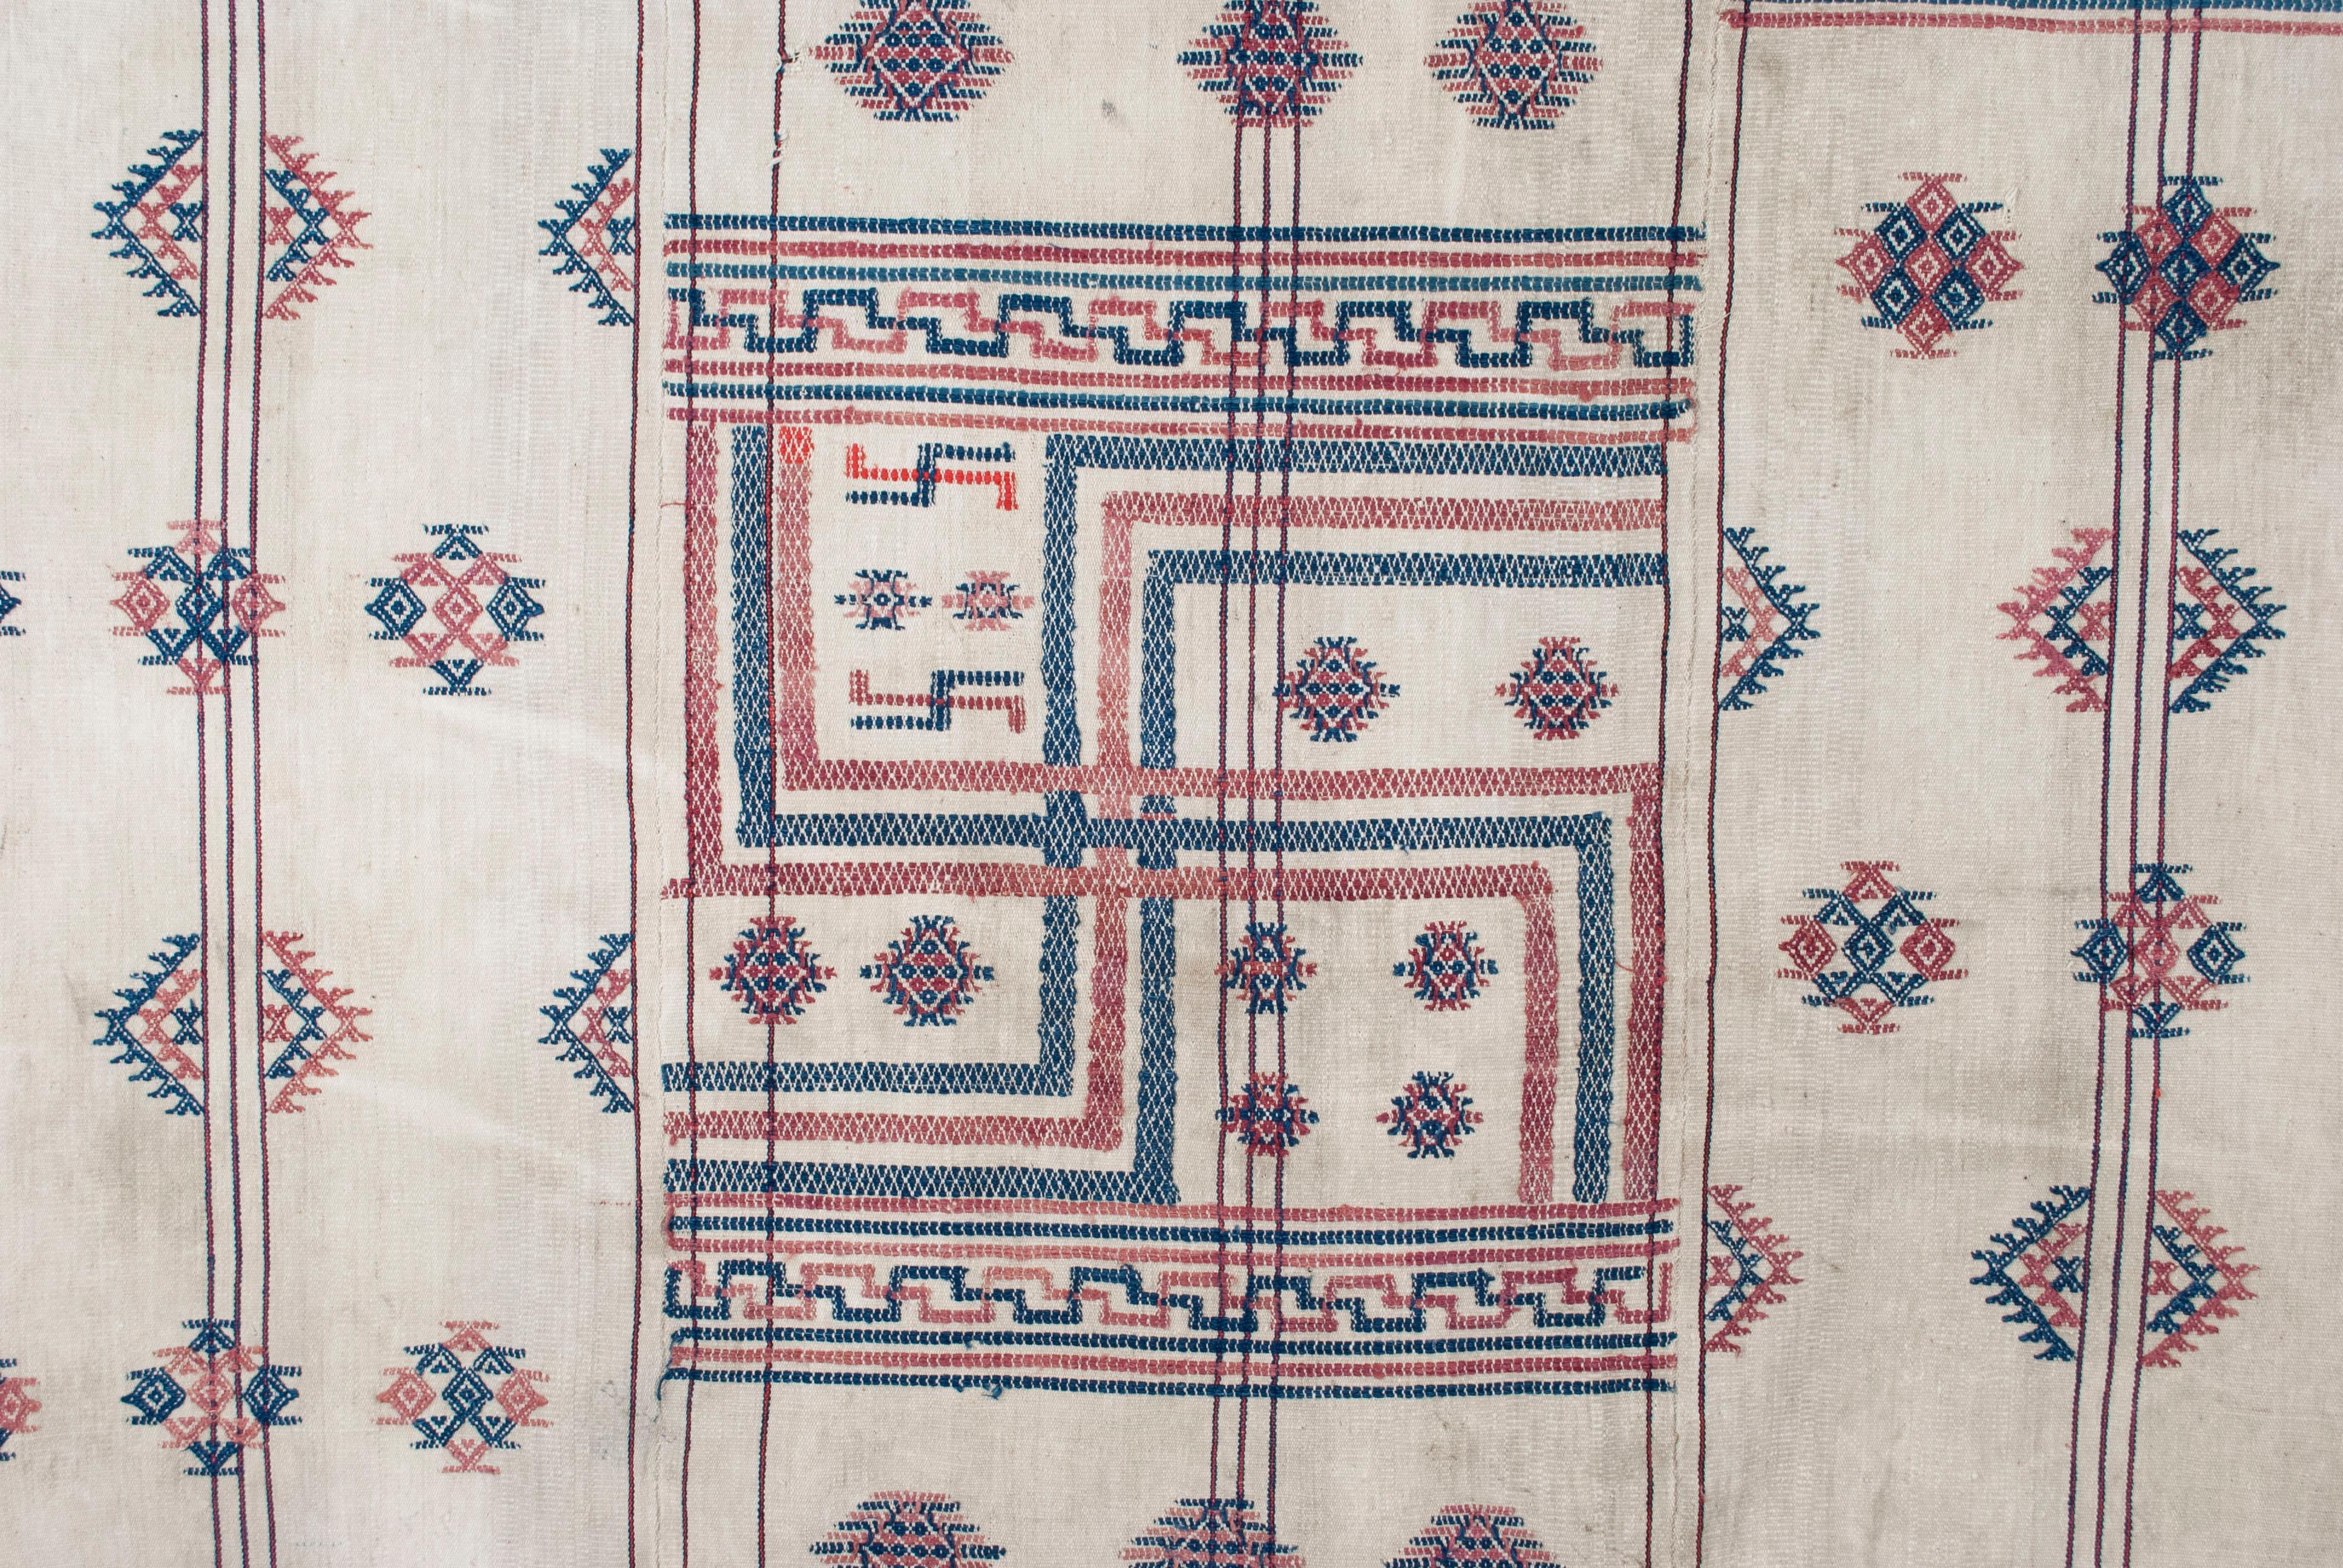 Early 20th Century Bhutanese wrapping cloth / bhundi

A beautifully preserved example of a rare Bhutanese wrapping cloth (bhundi), which would have been used for outings into the countryside or other practical purposes. The central swastika motif